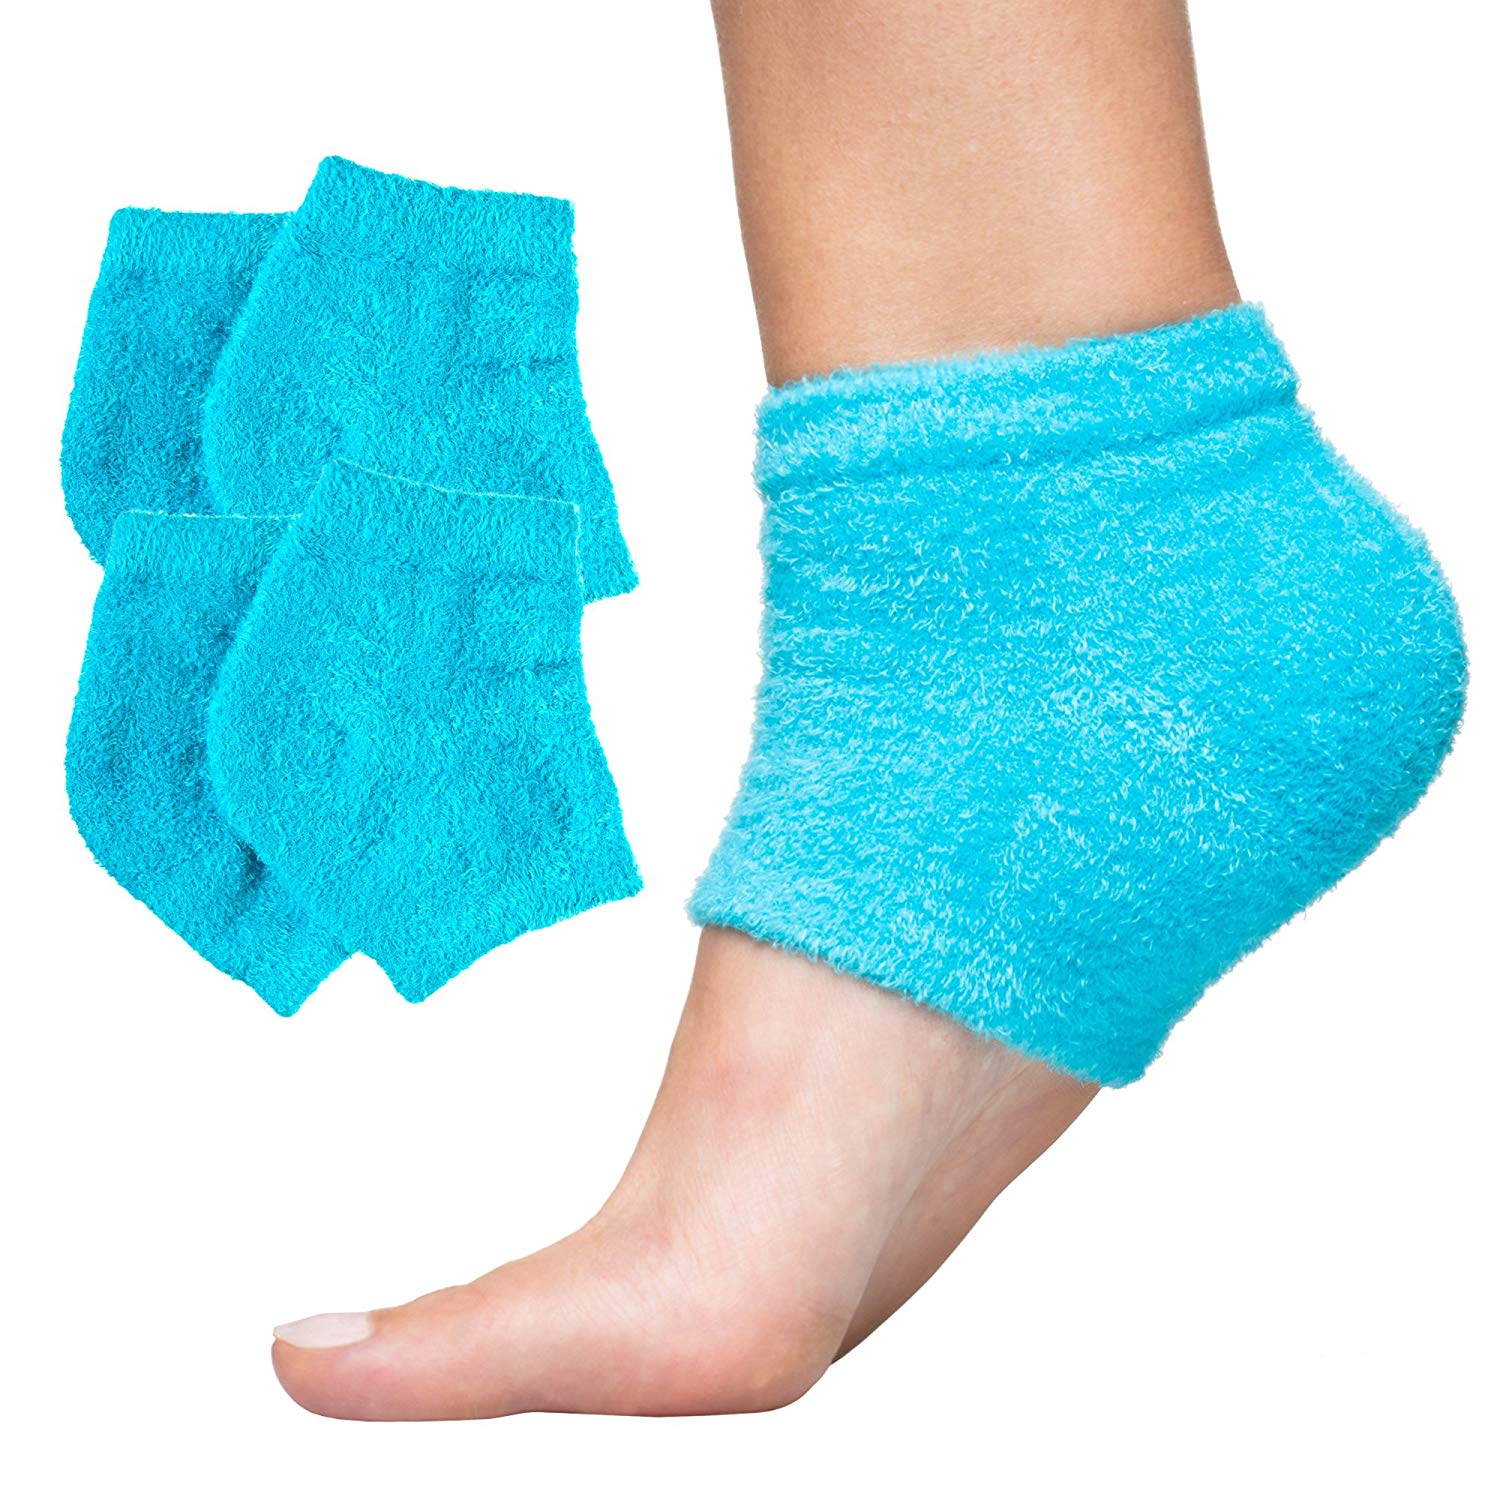 ZenToes 2-pack Ankle Bone Protection Socks with Gel Pads - 9141851